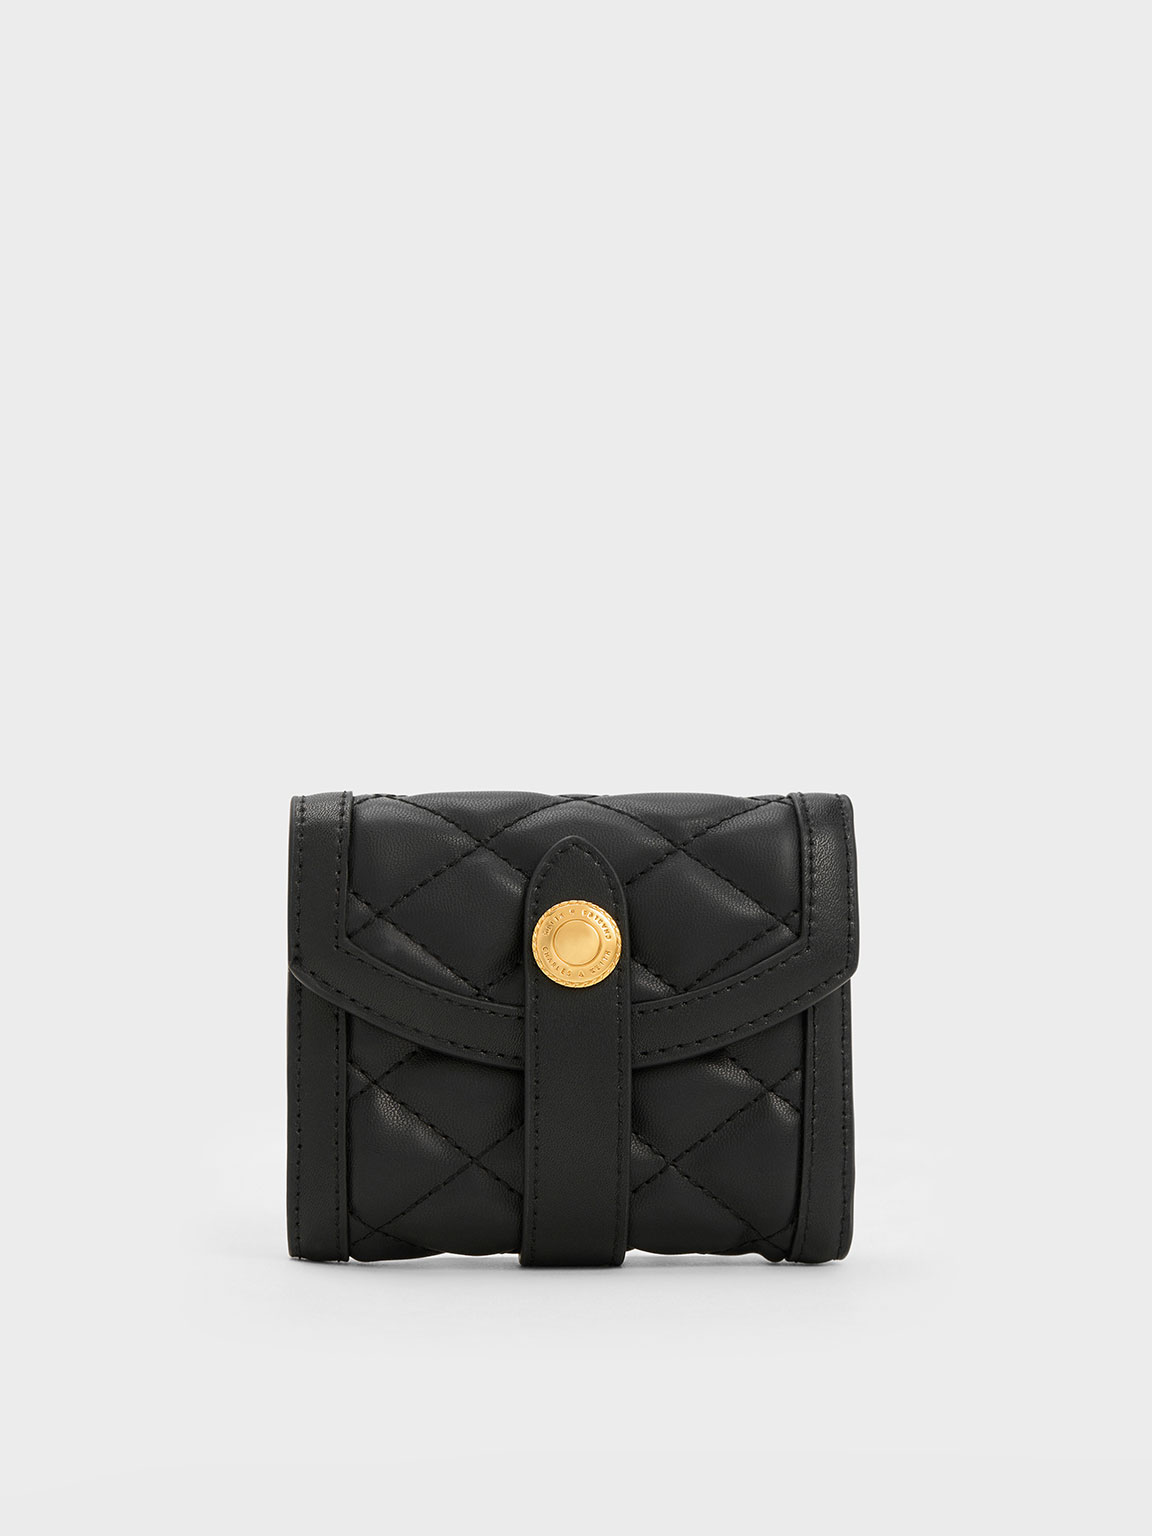 DKNY Black Quilted Leather Zip Around Wallet Dkny